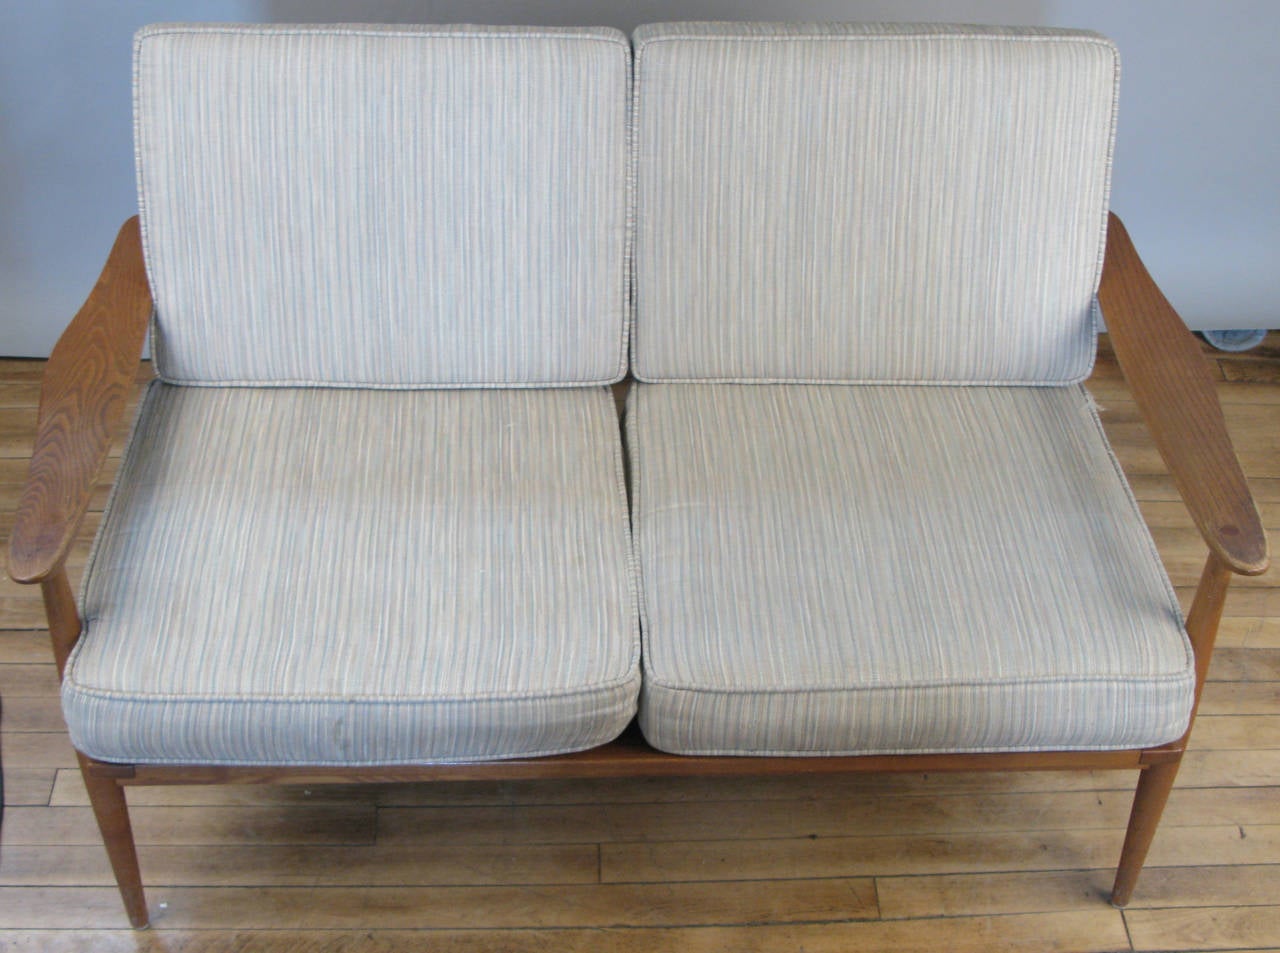 A Classic modern 1960s Danish settee in oak, with its original cushions. We have the companion lounge chair as well.